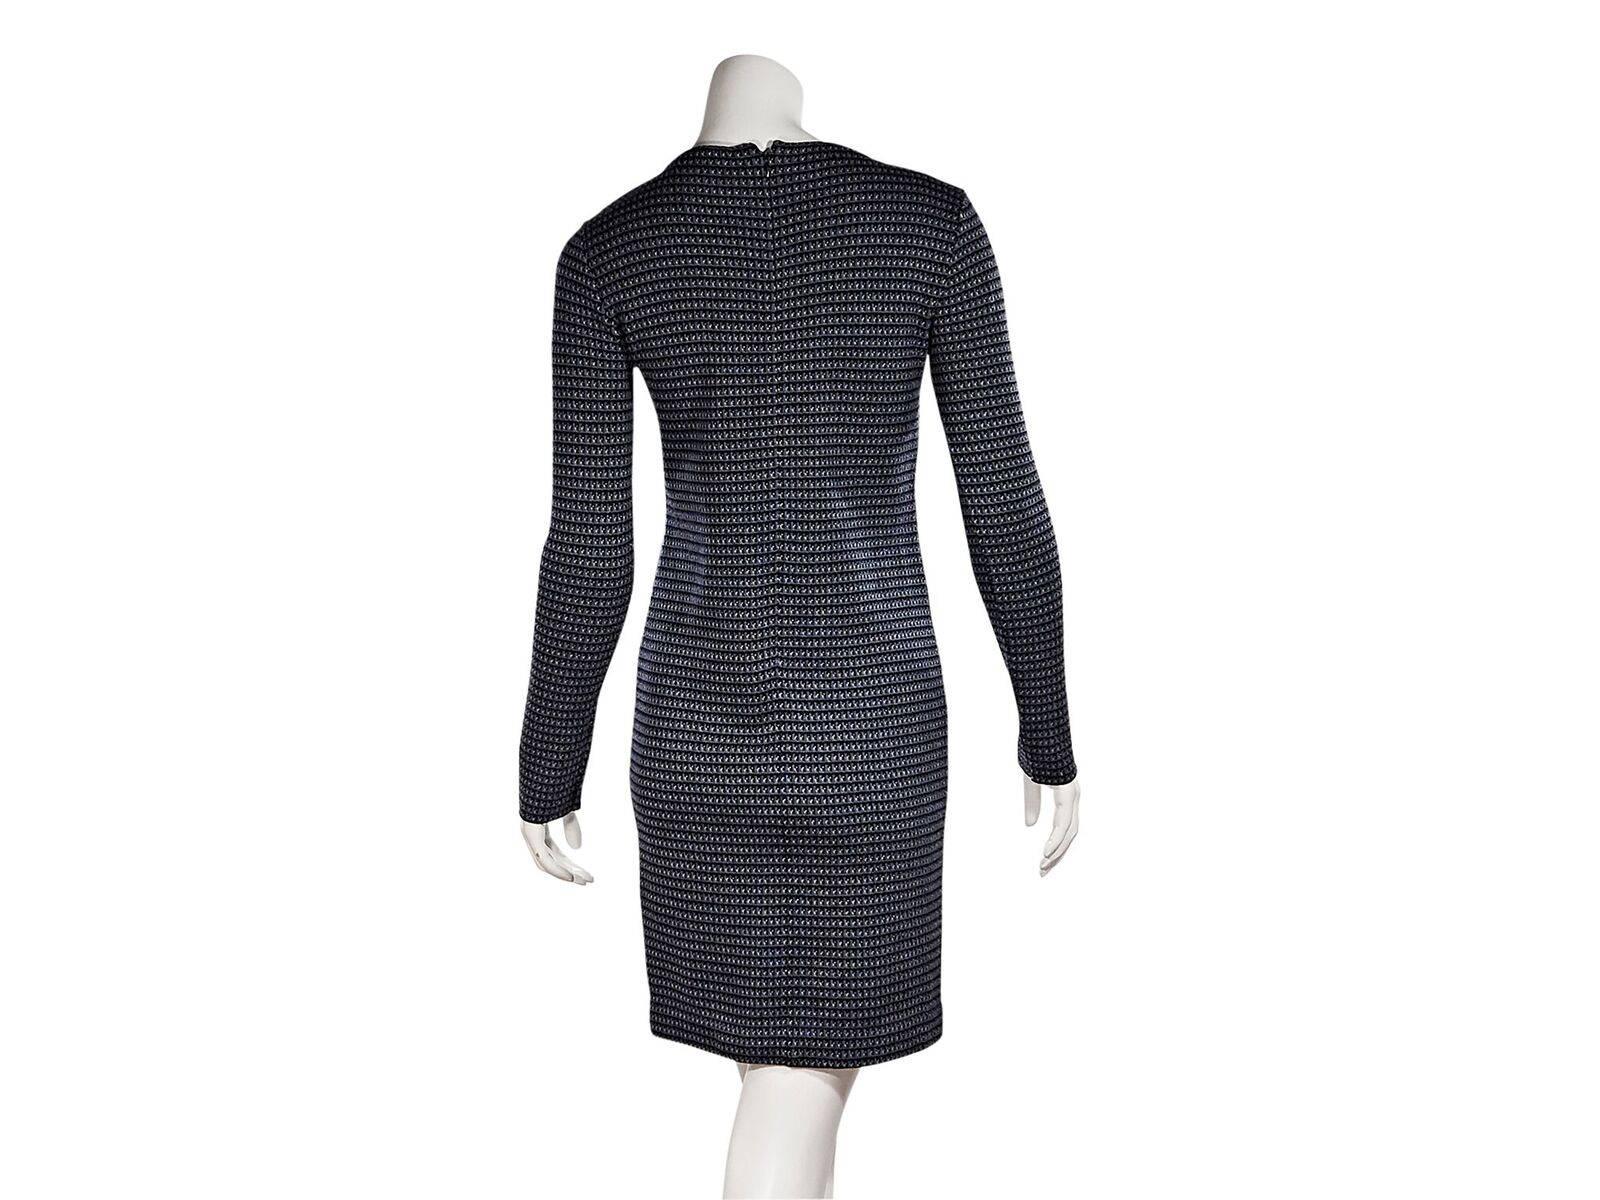 Product details:  Blue knit dress by JIl Sander.  Jewelneck.  Long sleeves.  Concealed back zip closure.  Chest and waist patch pockets.  32